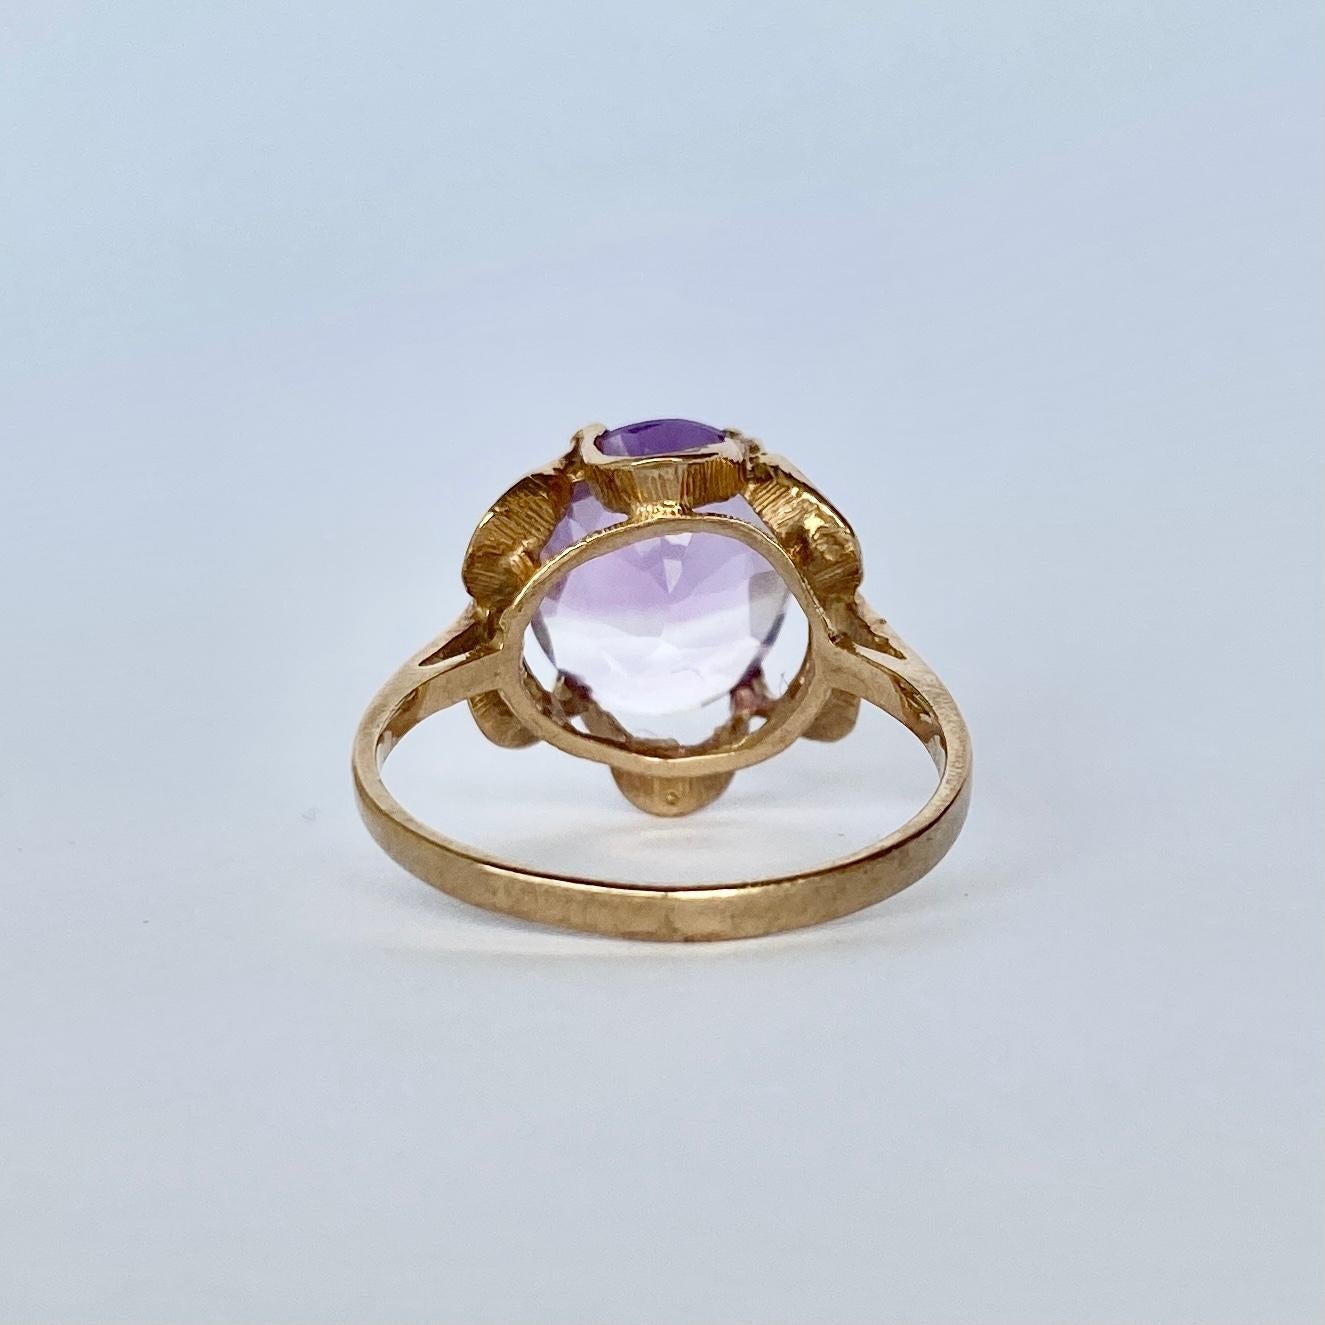 This stunning pale amethyst is set in a scalloped 9 carat gold setting. Fully hallmarked London 1989.

Ring Size: P or 7 3/4 
Stone Dimensions: 12x10mm

Weight: 2.9g